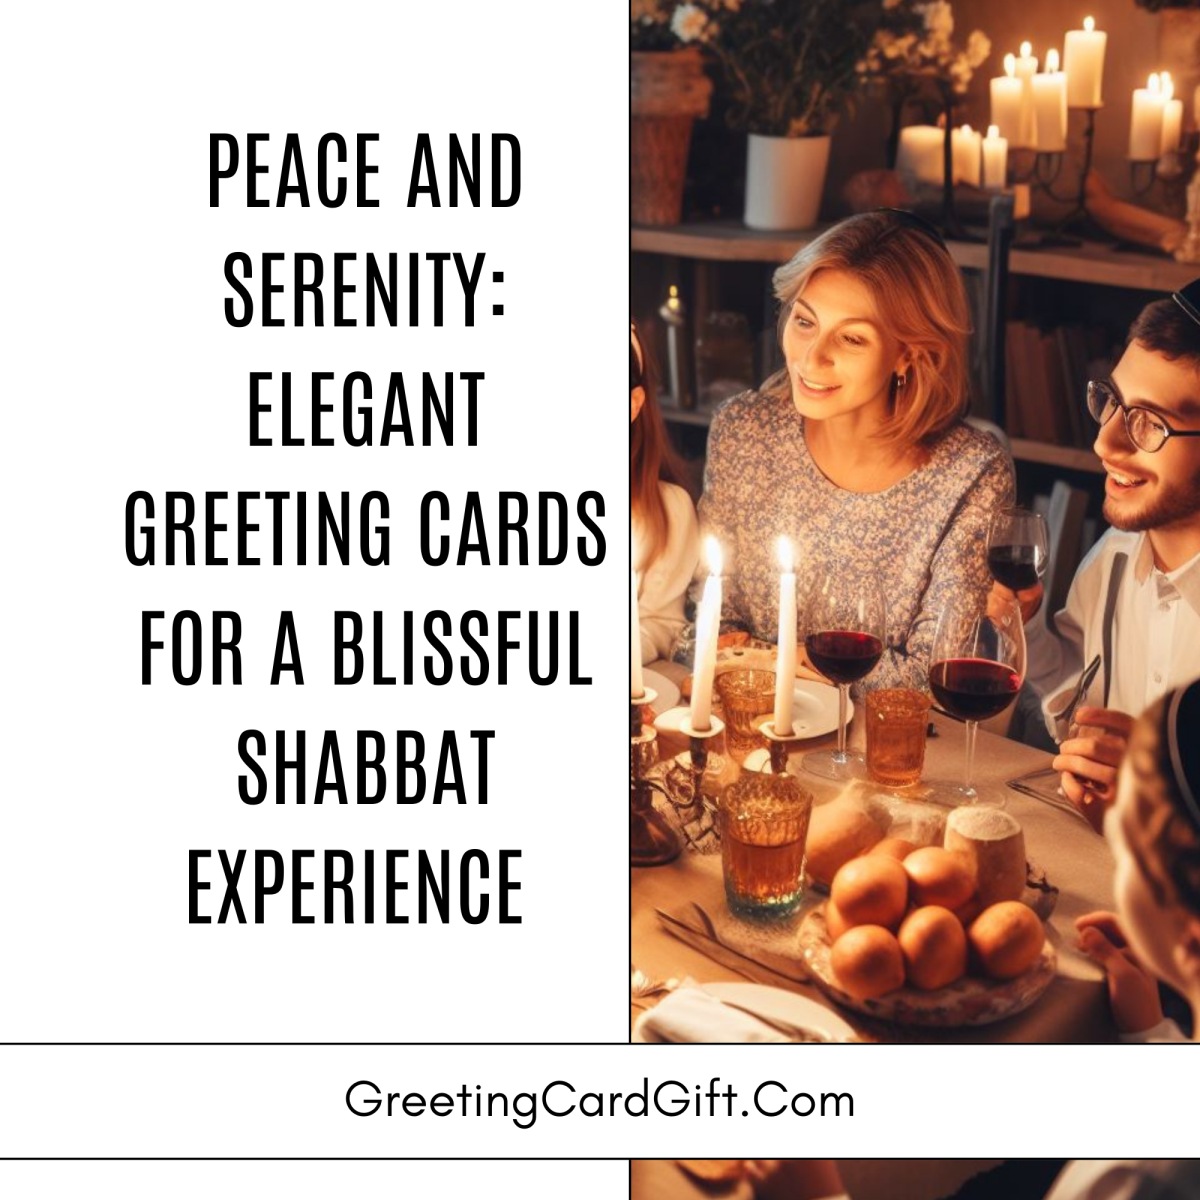 Peace And Serenity: Elegant Greeting Cards For A Blissful Shabbat Experience